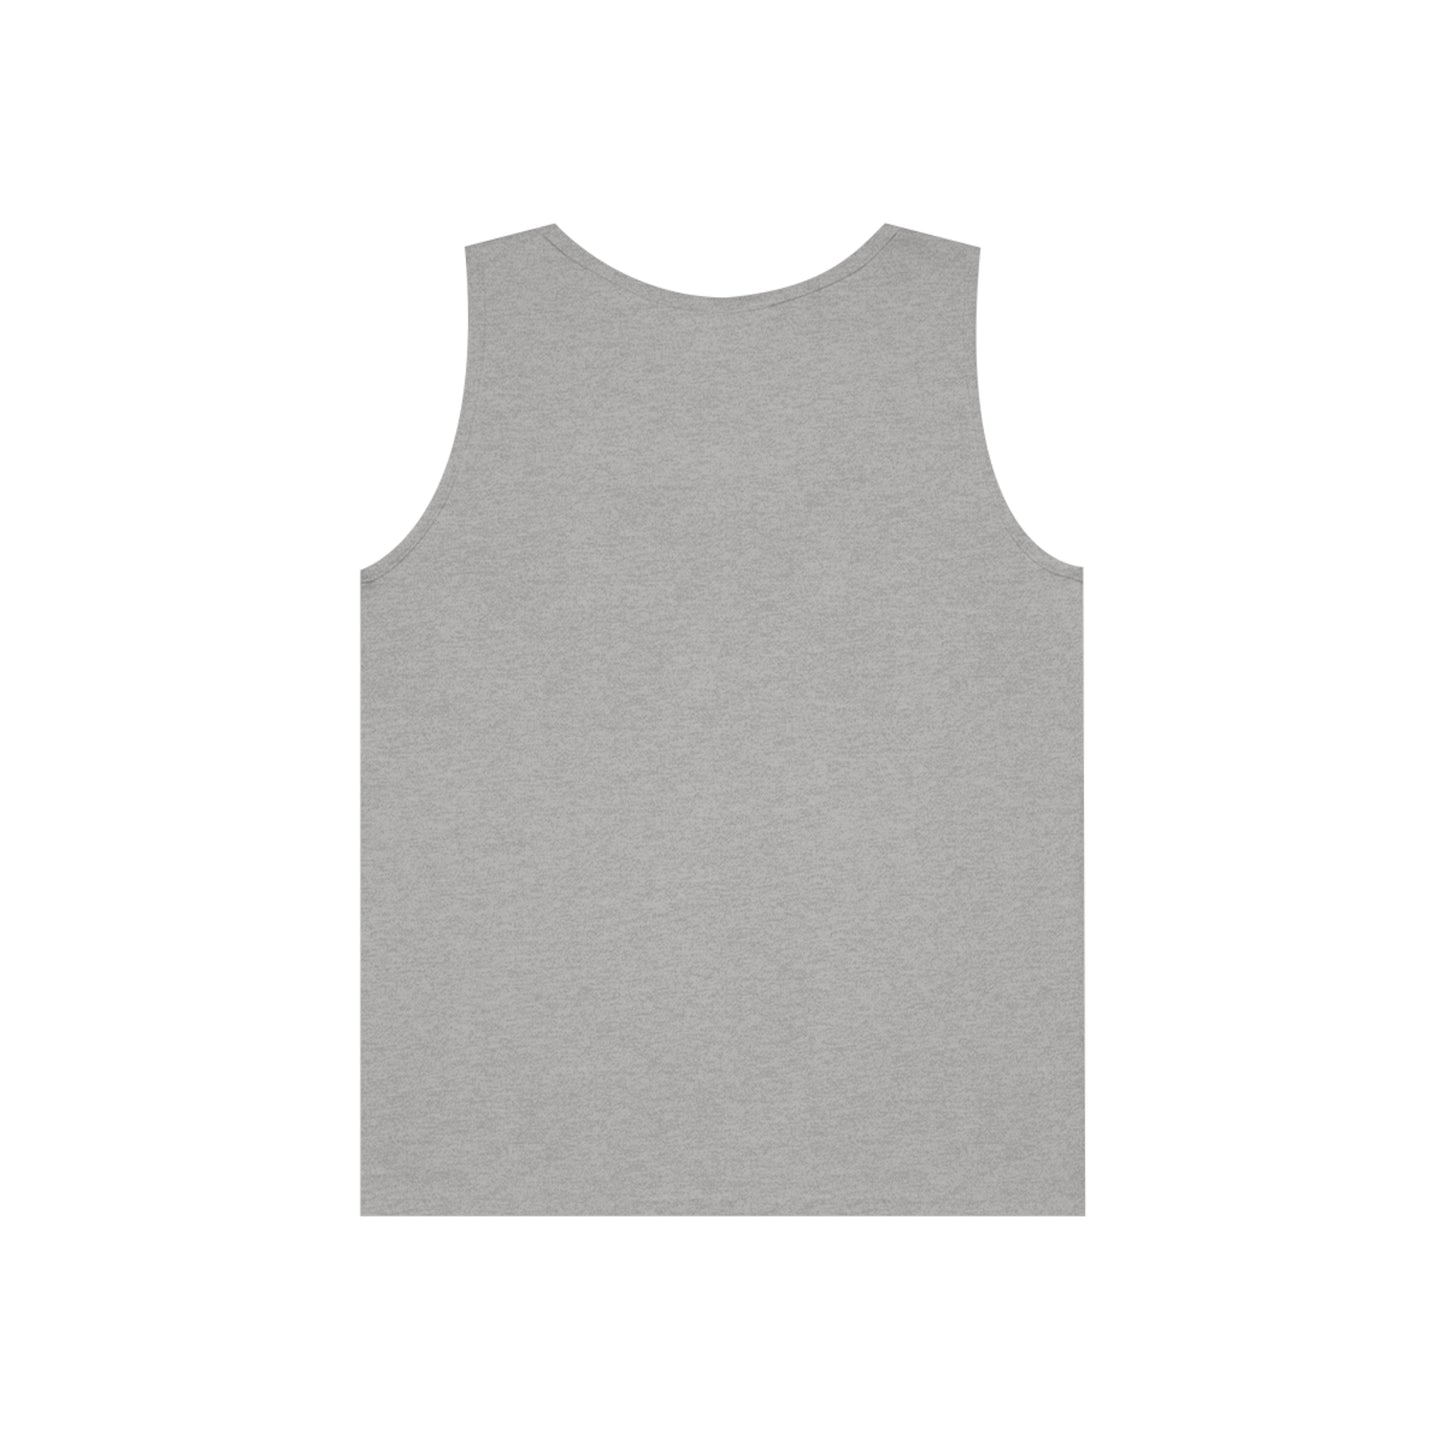 Flat back view of the grey shirt